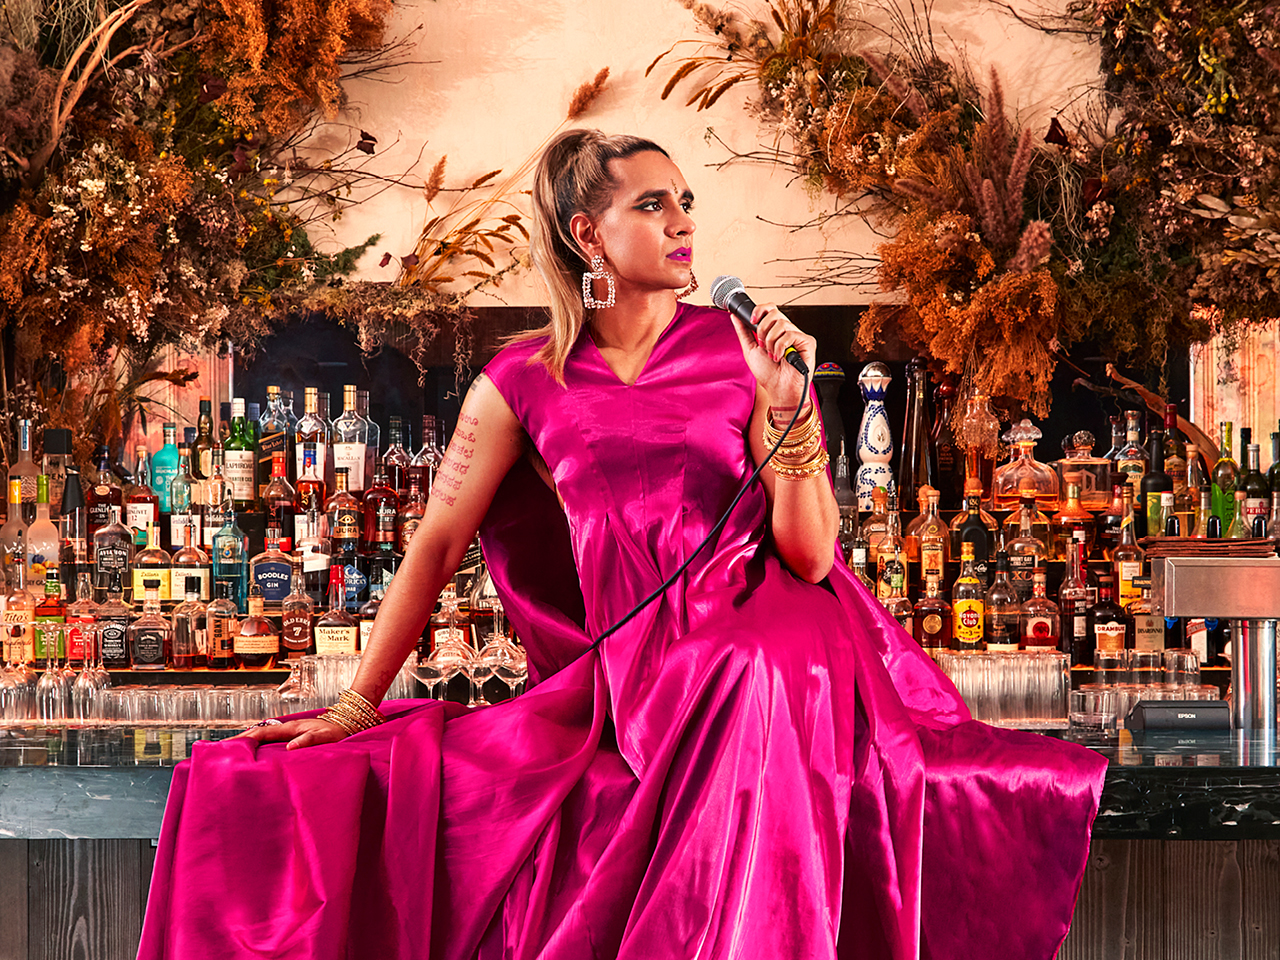 Author Vivek Shraya wearing a pink gown and holding a microphone while sitting on a bar.